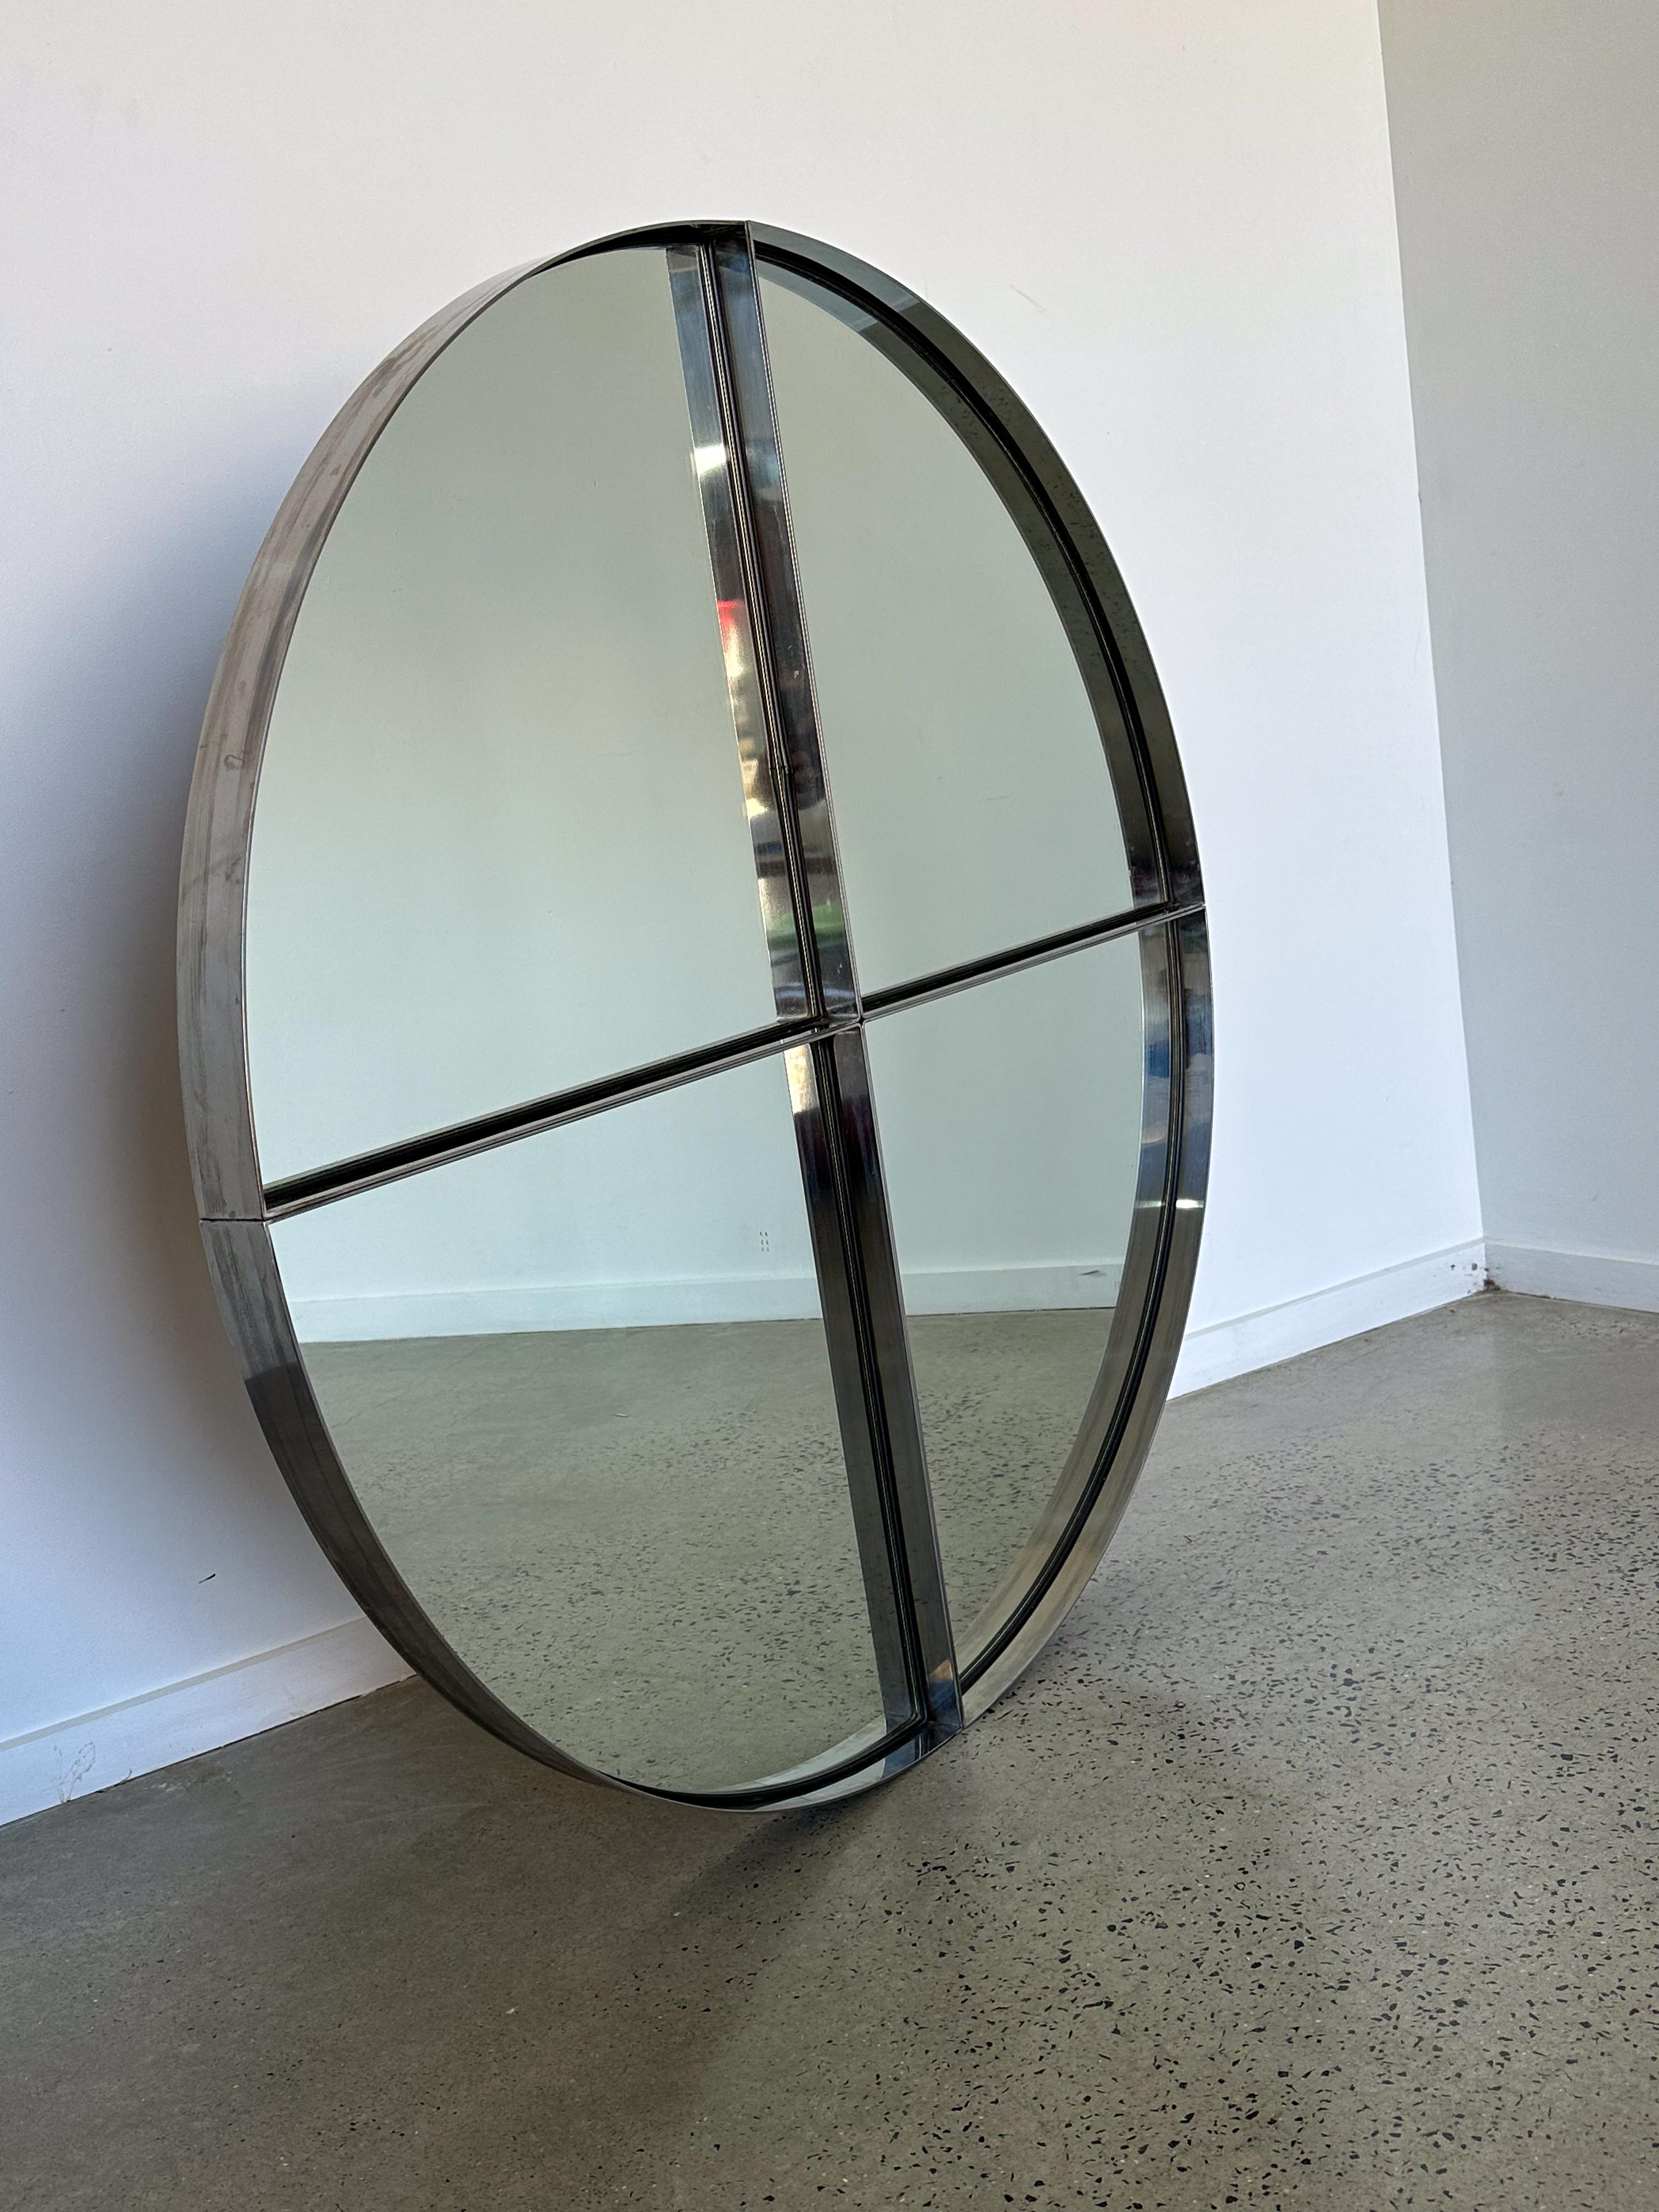 Vittorio Introini for Saporiti Italia large Mid century Modern round wall mirror divided into four segments.

Vittorio Introini (1933-2015) was an Italian architect and designer known for his contributions to modern and contemporary design. He